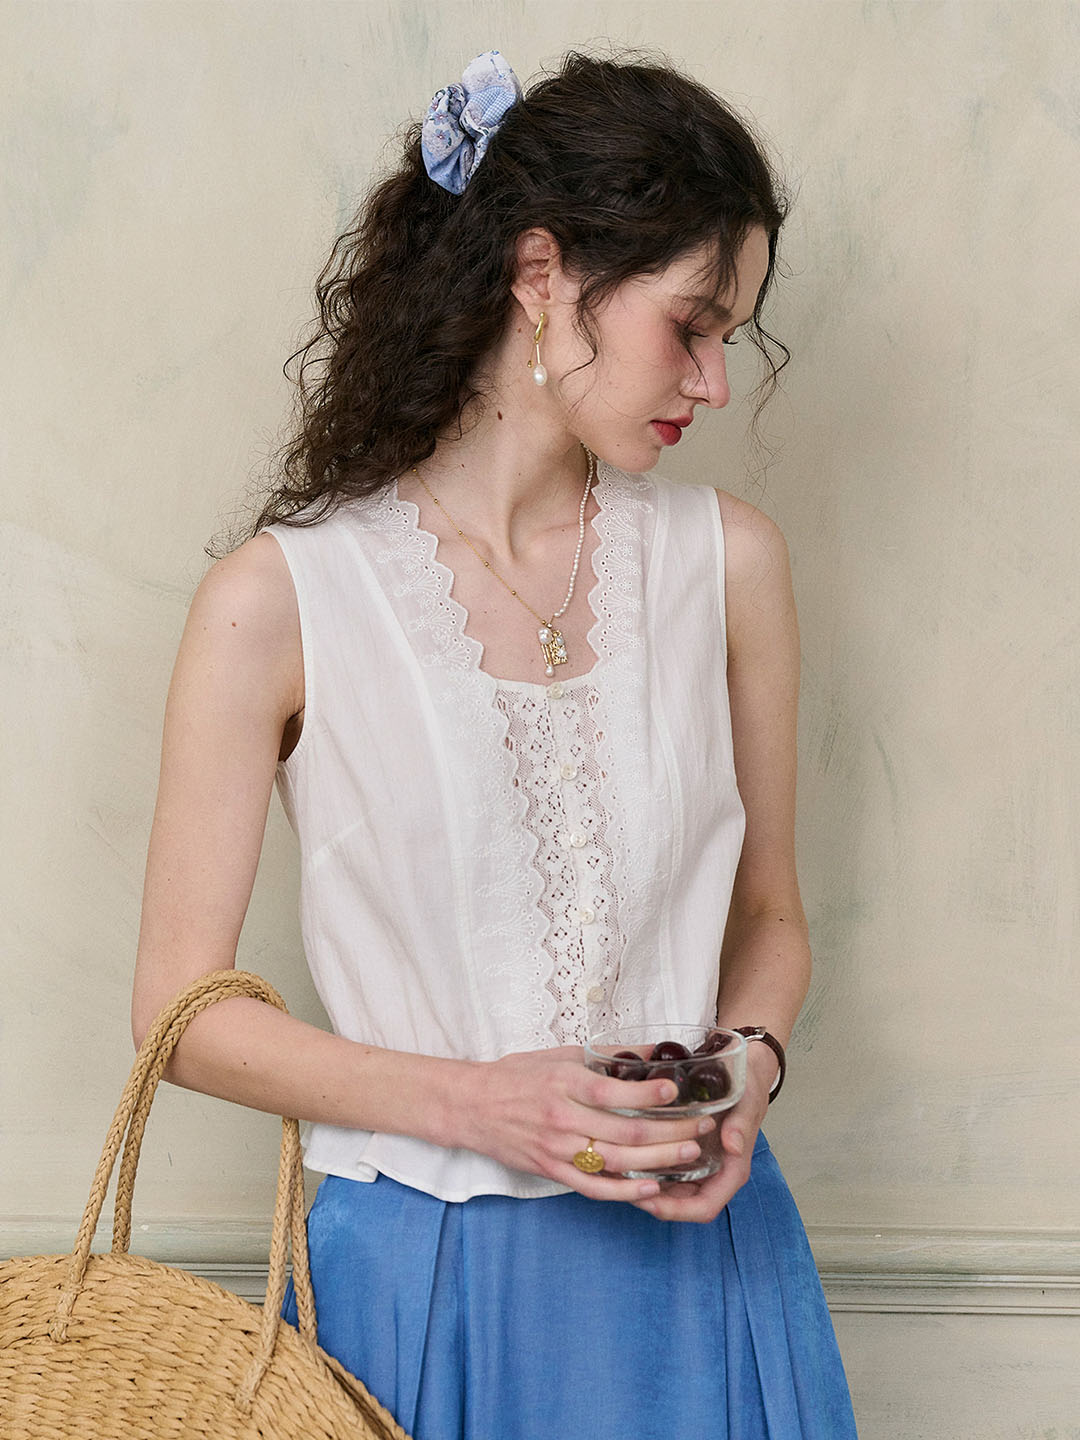 Mira Wave Lace Square Neck Embroidered Ruffle Hem Sleeveless Cotton Top